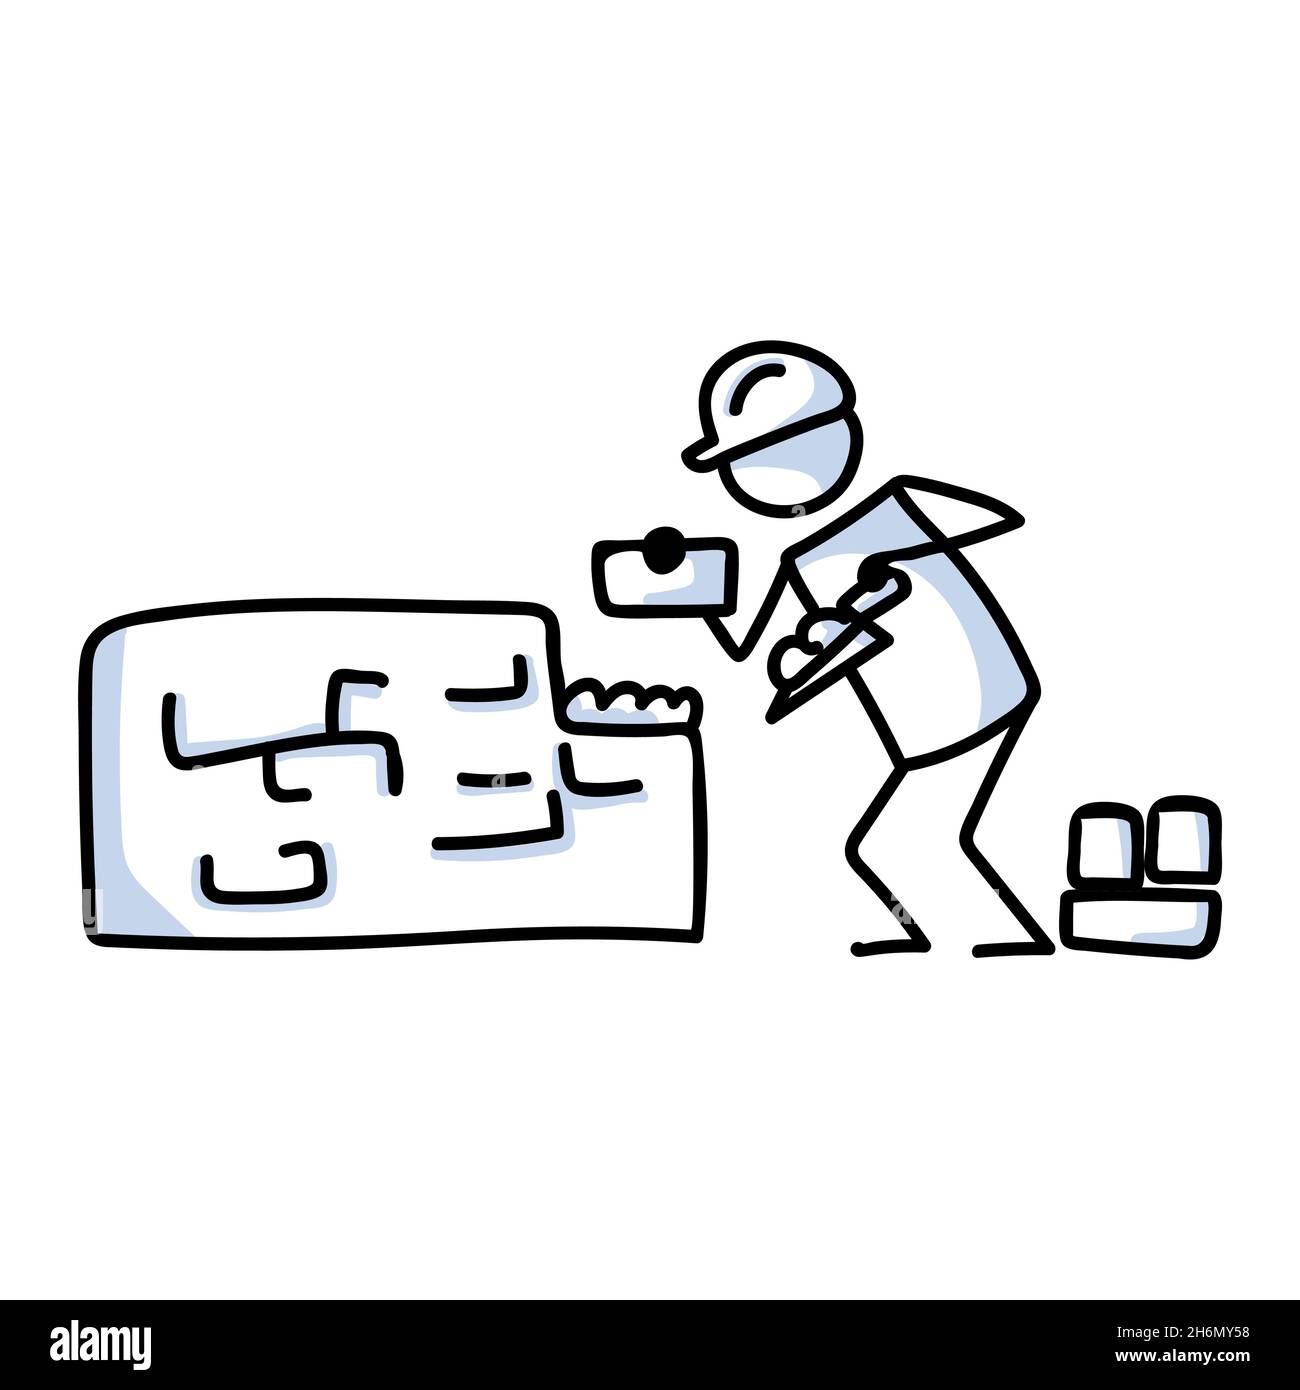 Drawn stick figure bricklaying construction worker. Tool use for industry sketchnote. Vector illustration of person on building site Stock Vector